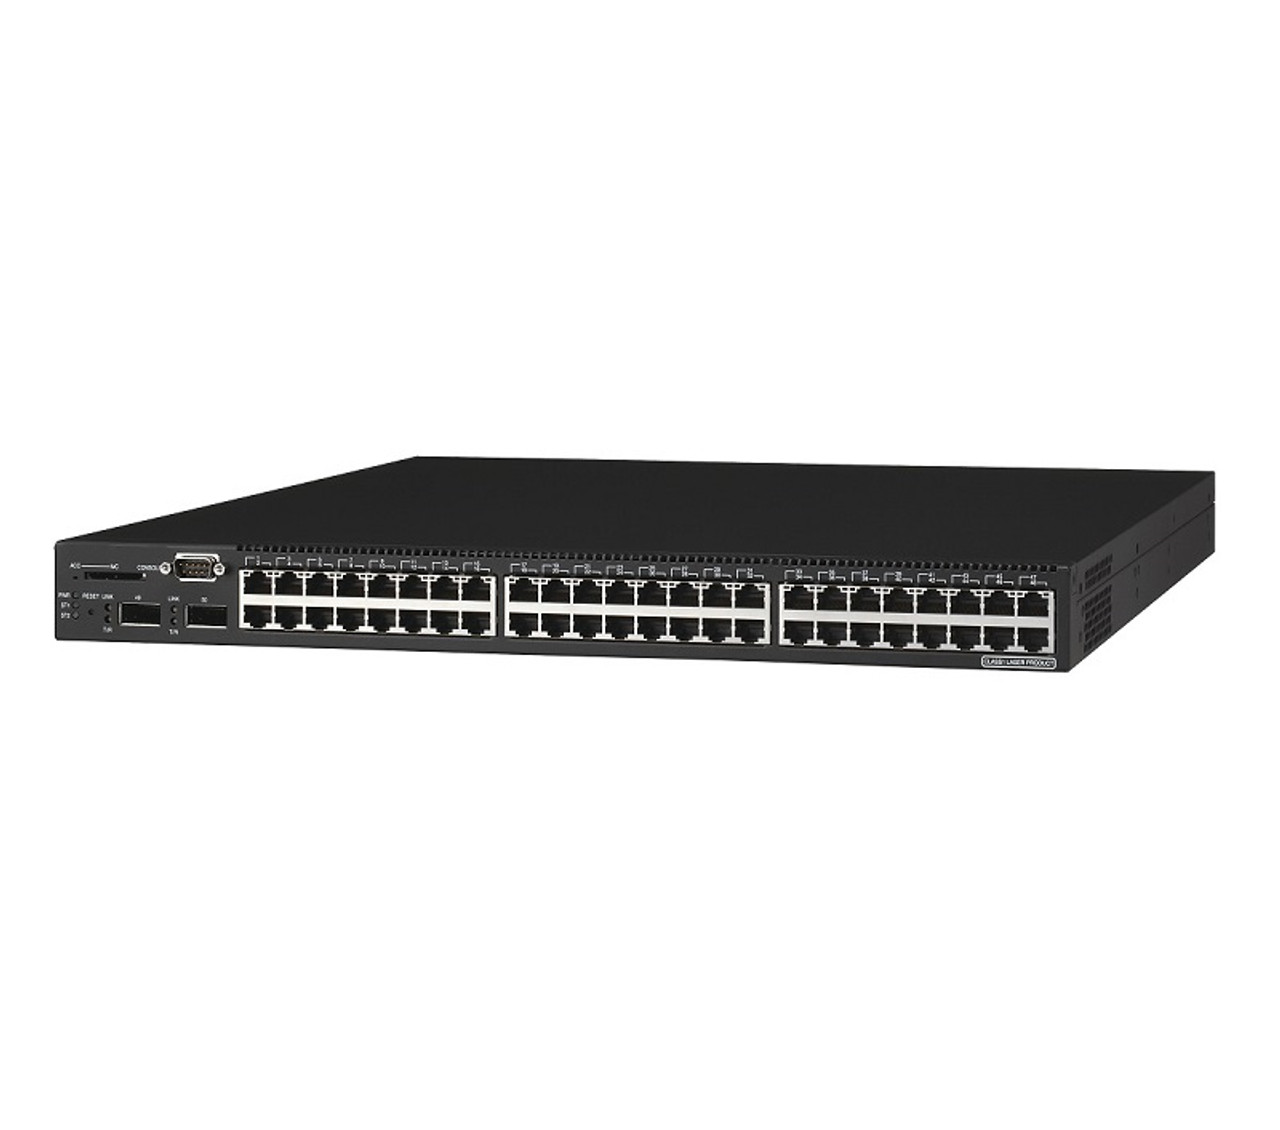 HP 5406 8p 10GBASE-T 8p 10GbE SFP+ v2 zl Switch with Premium Software